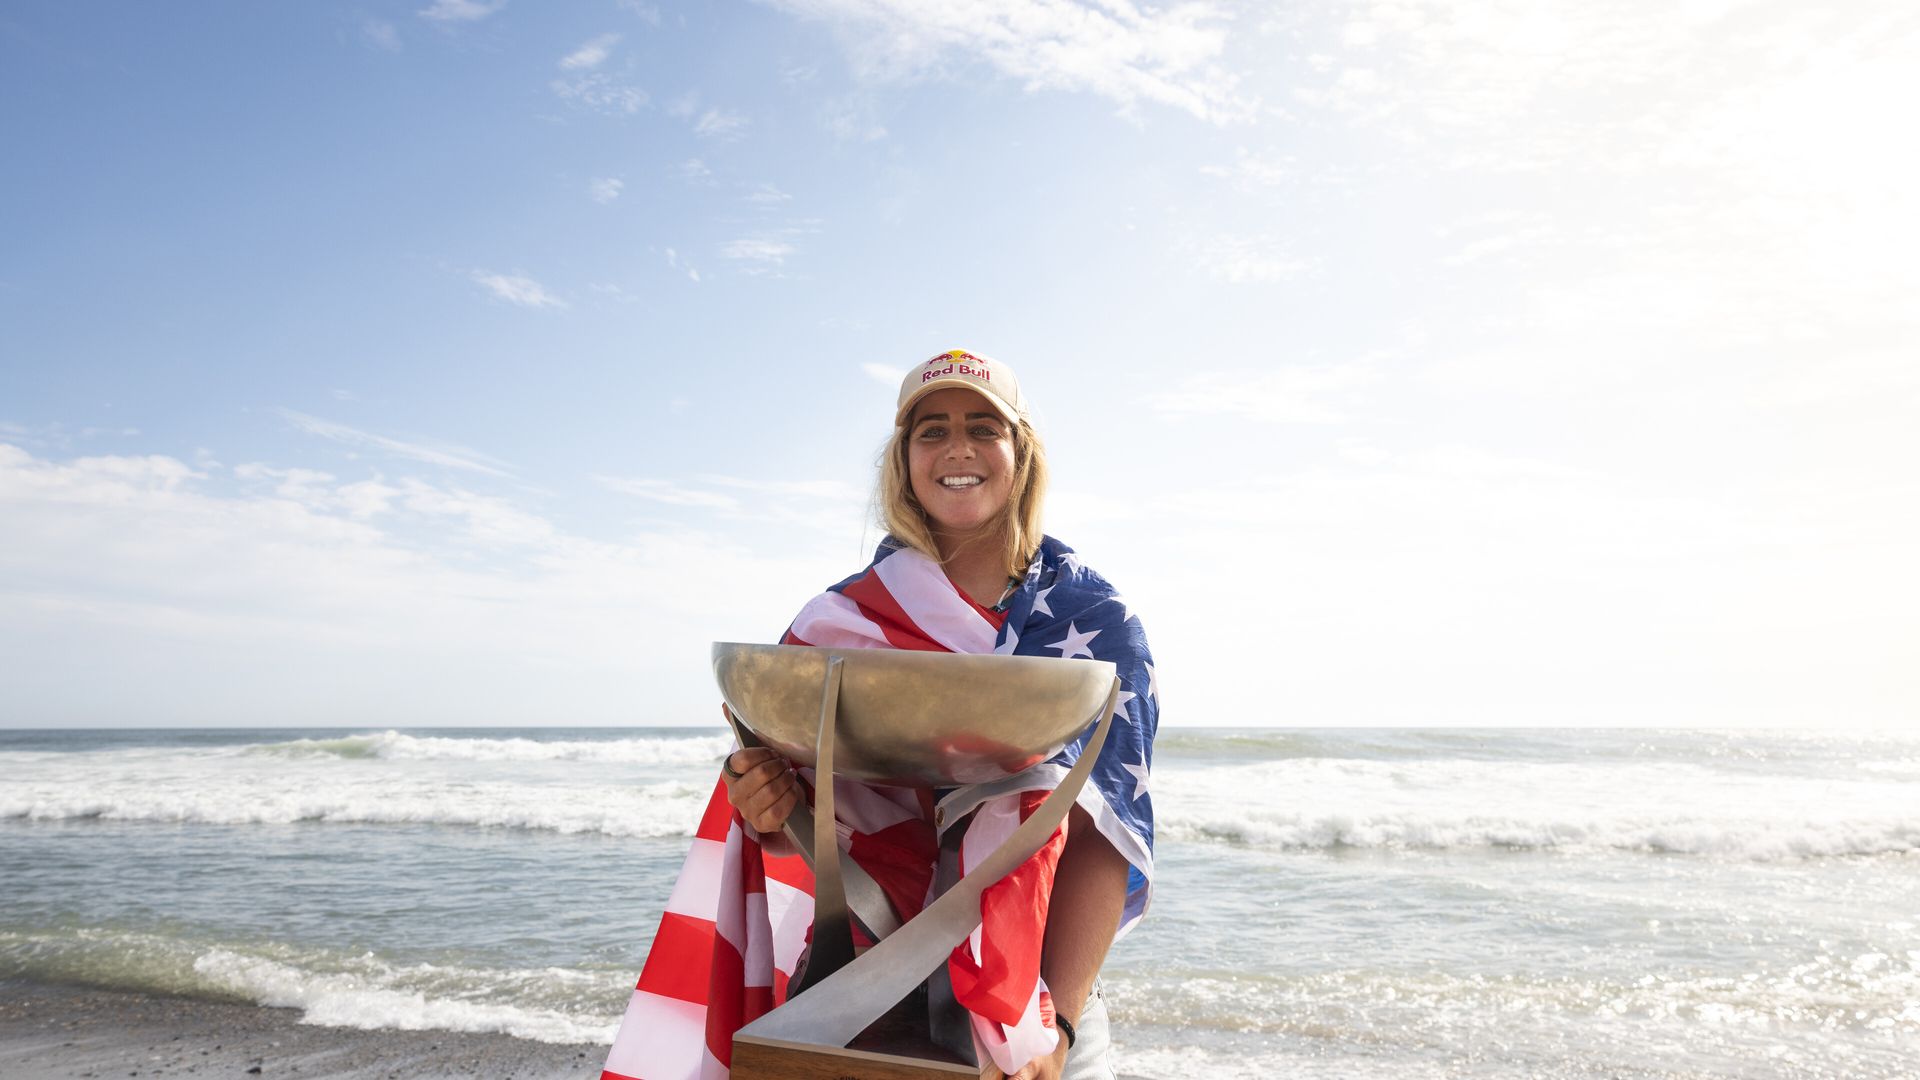 A woman draped in an American flag stands at the beach holding a big bowl/trophy.